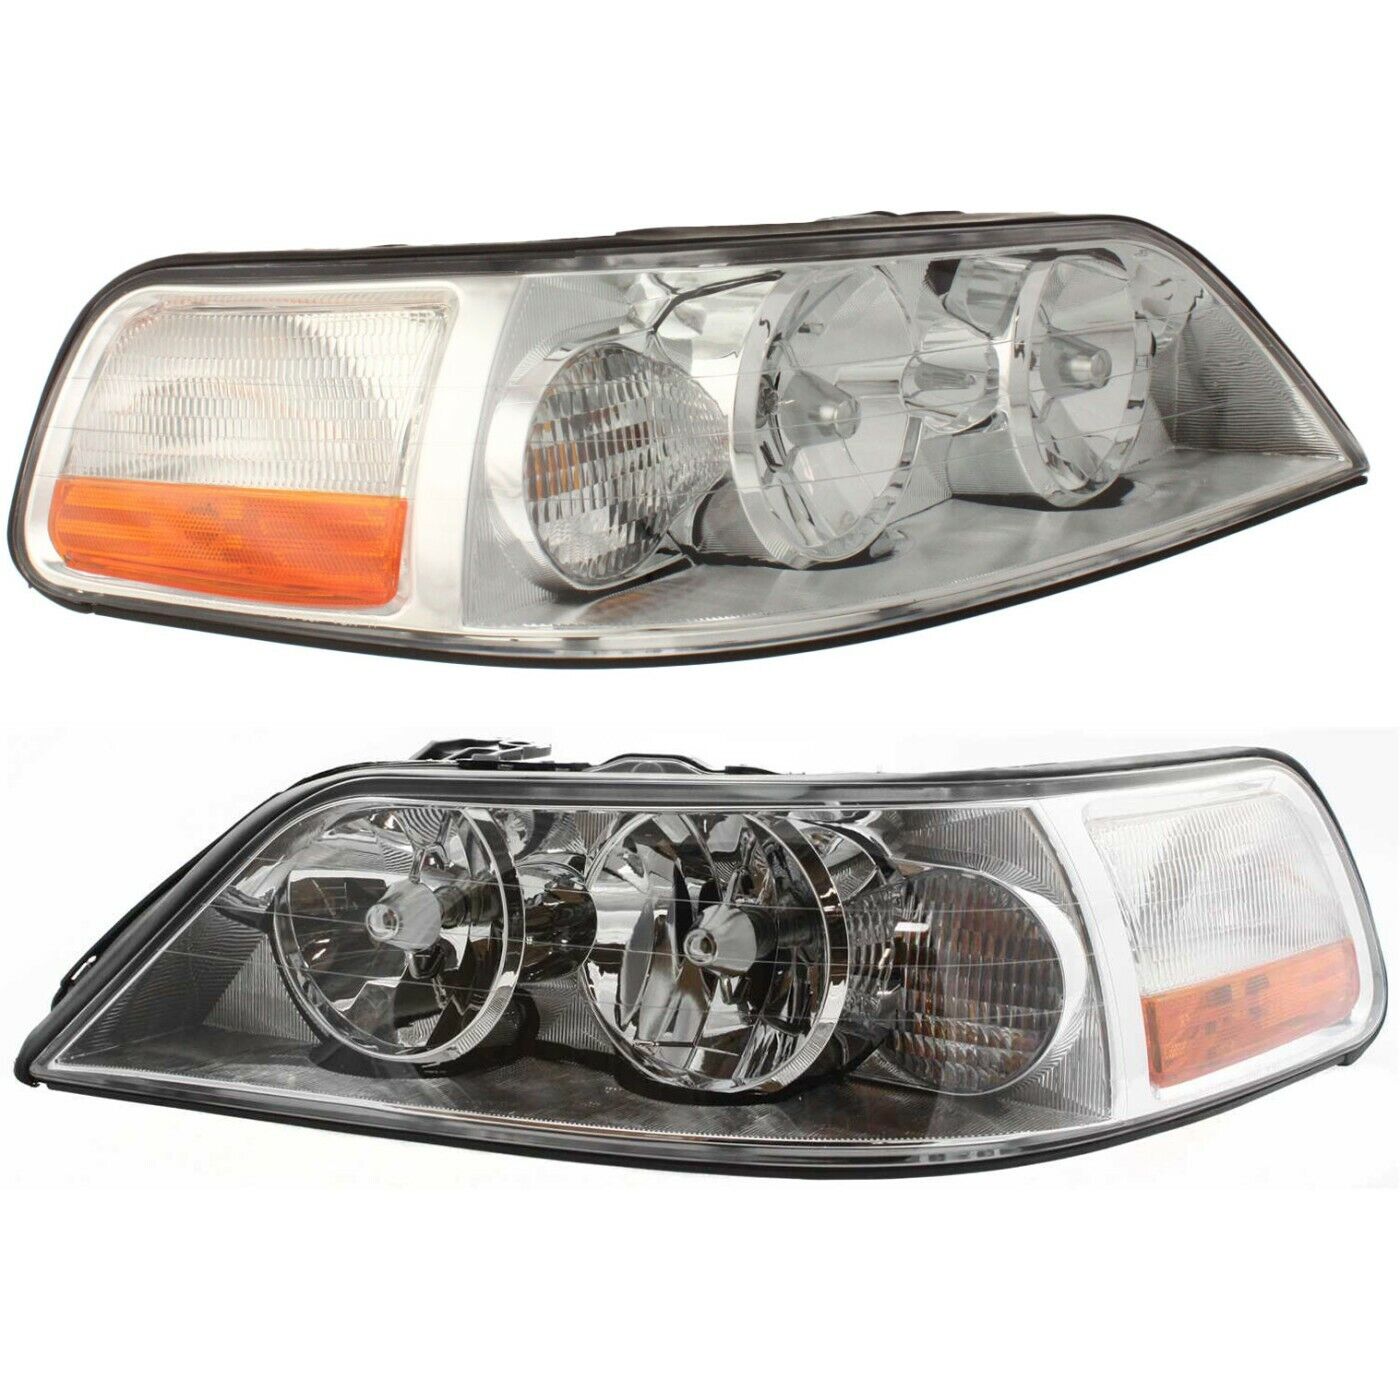 Headlight Set For 2003-2004 Lincoln Town Car Left and Right With Bulb 2Pc